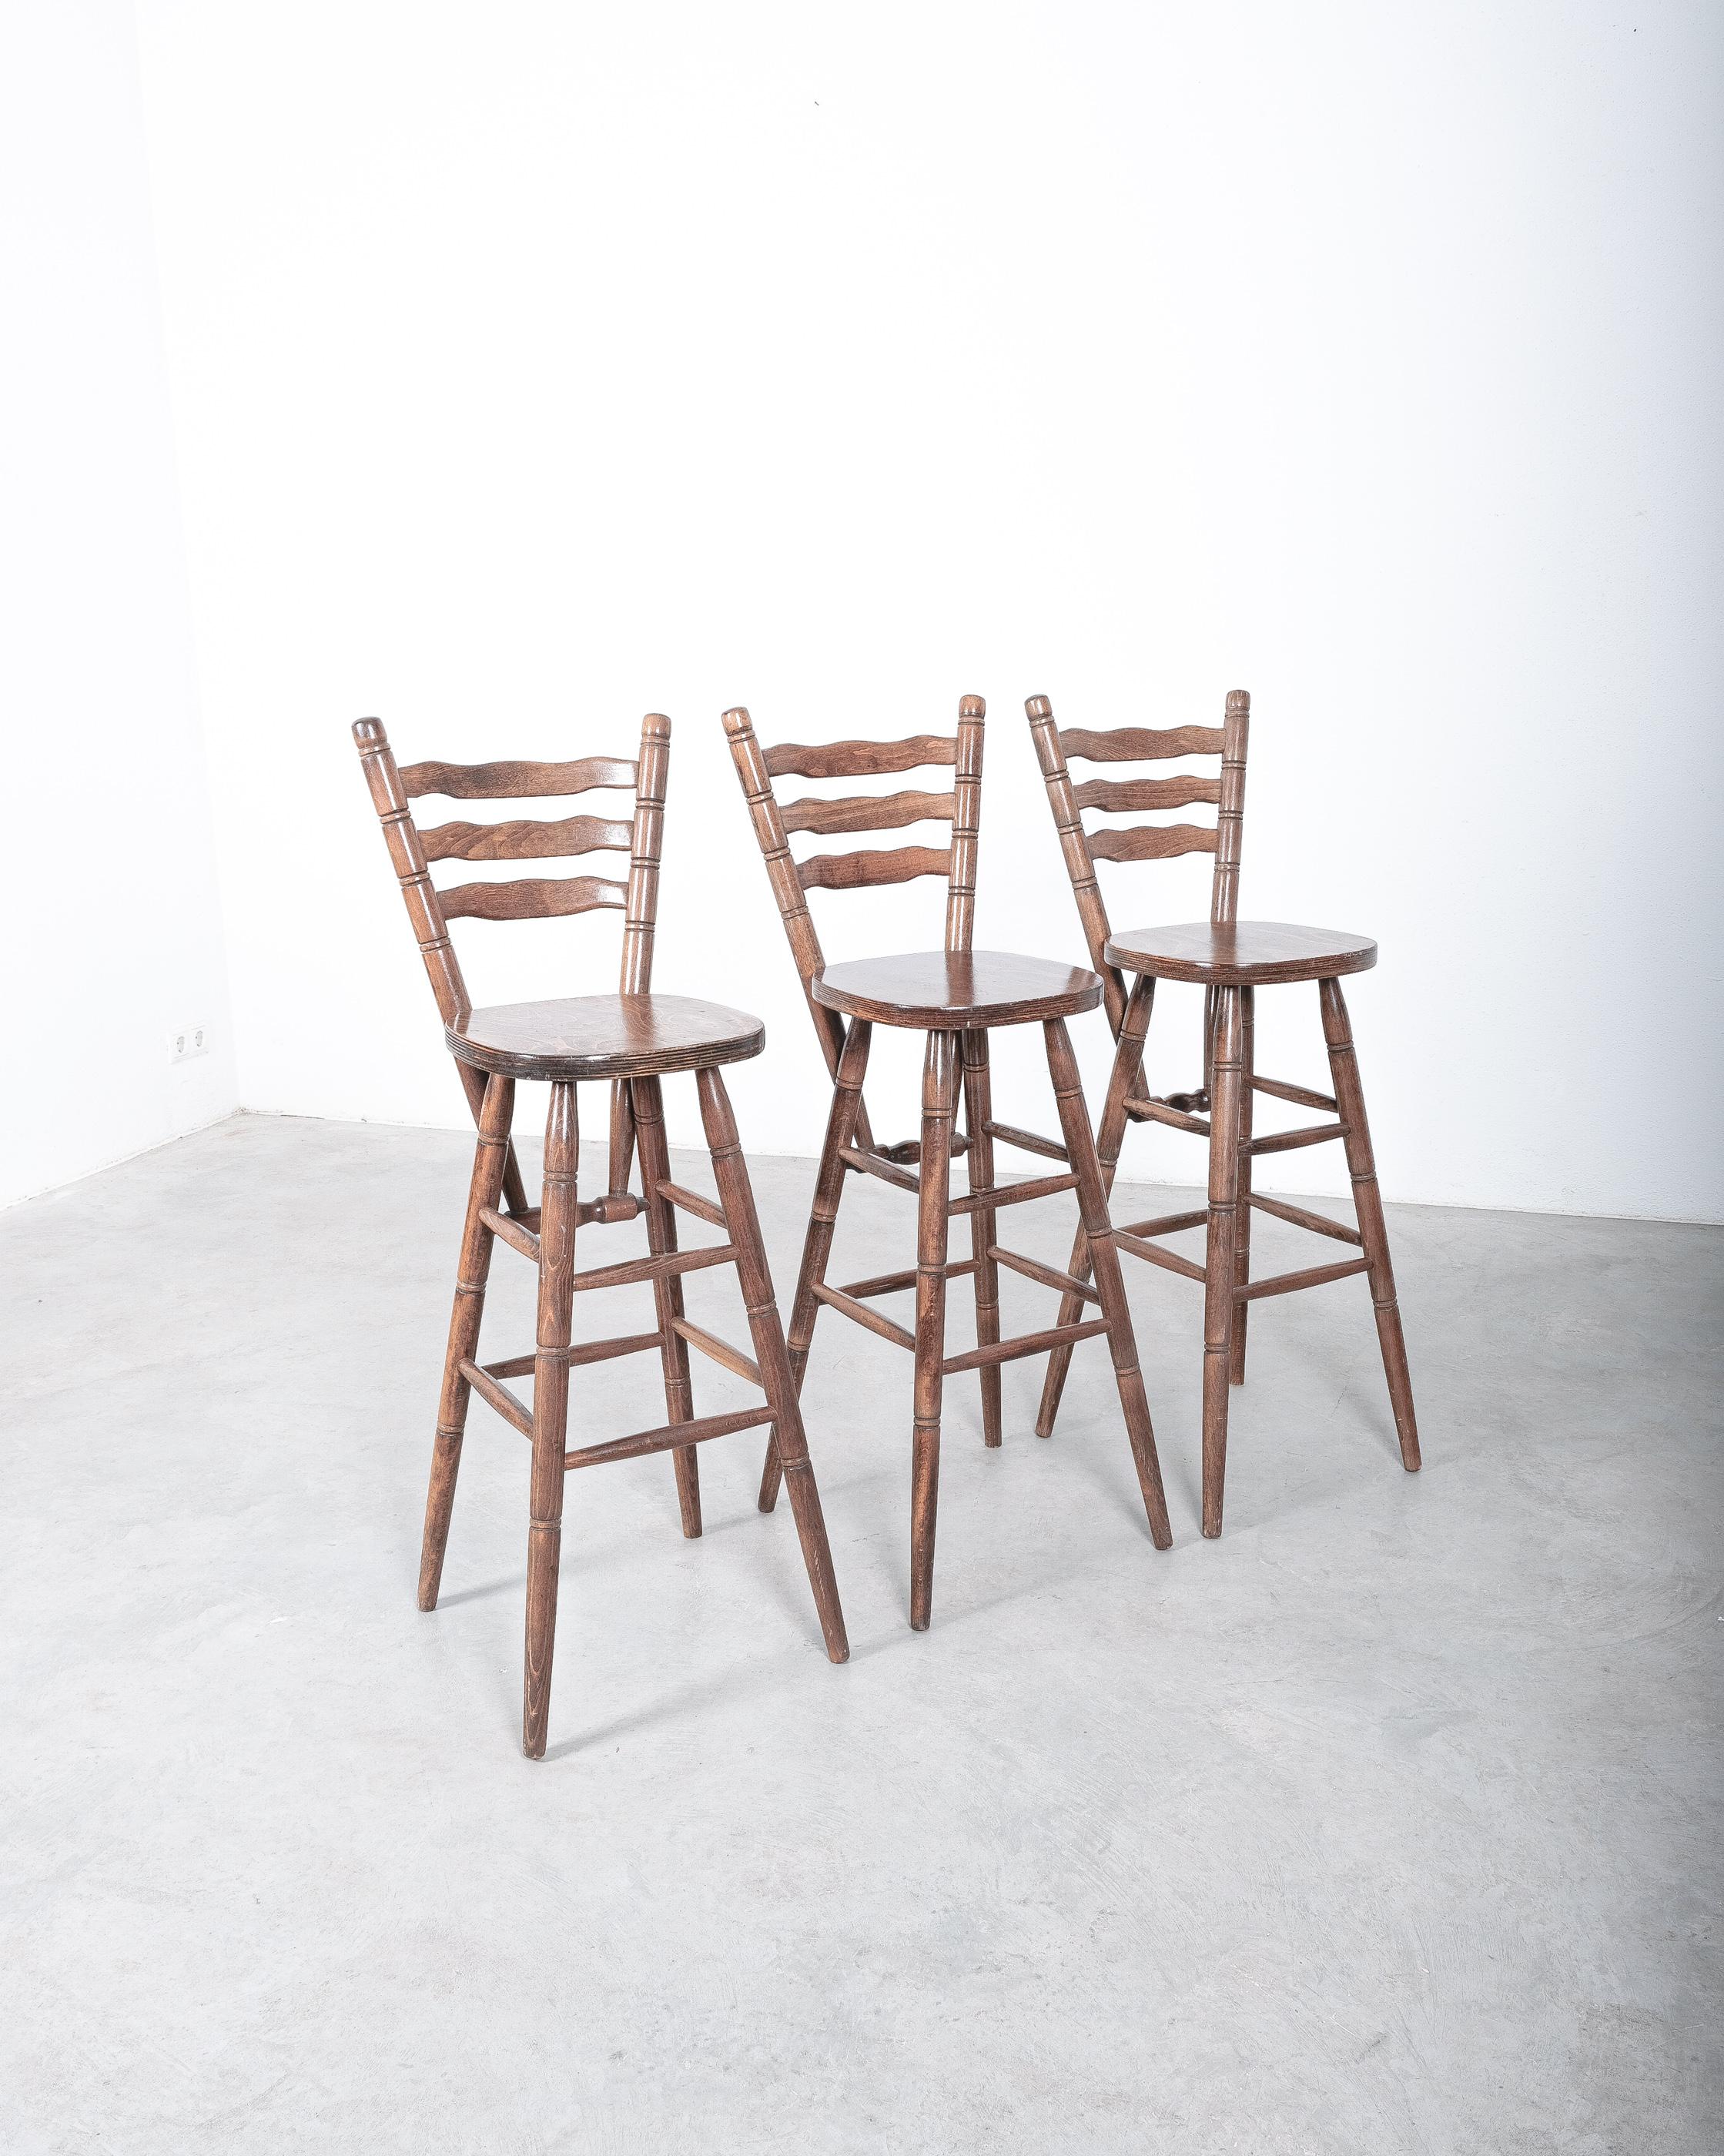 Rustic Bar Stools Midcentury from Birch Wood, Germany, 1970 In Good Condition For Sale In Vienna, AT